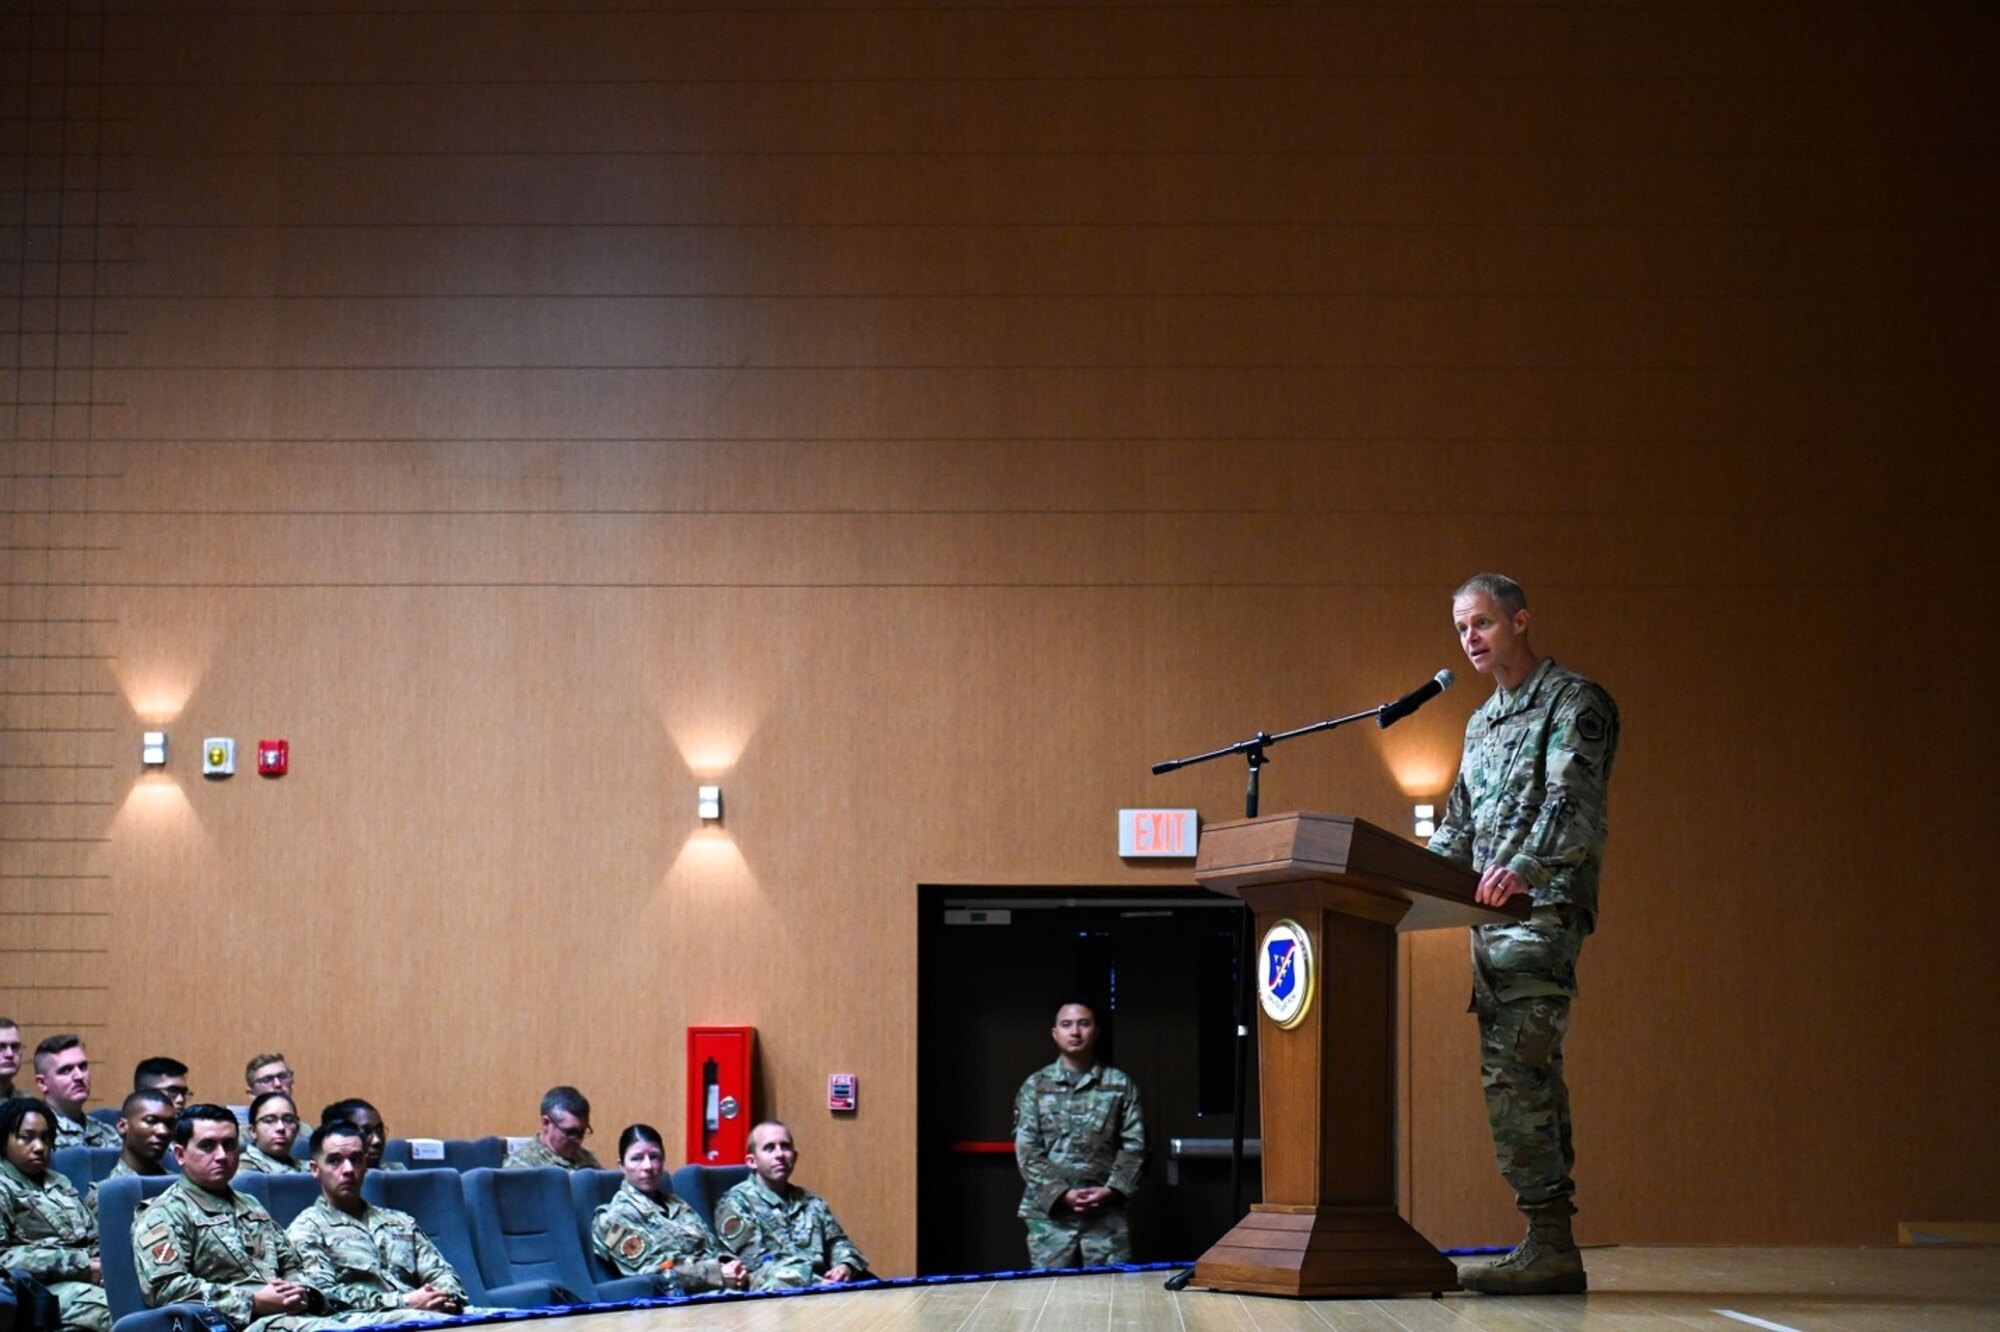 Maj. Gen. Derek France, Third Air Force commander, delivers remarks during a change of command ceremony at Incirlik Air Base, Turkey, June 30, 2022. During the ceremony, Col. Jason Gingrich relinquished command of the 39th ABW to Maj. Gen. Derek France, Third Air Force commander, who then charged Powell with leading the wing. The 39th ABW is charged with defending NATO’s southern flank under the auspices of 3rd AF, U.S. Air Forces in Europe – Air Forces Africa and U.S. European Command. The wing projects global power through strategic deterrence, agile combat support and enduring partnerships to defend U.S. interests and allies. (U.S. Air Force photo by Senior Airman Joshua T. Crossman)